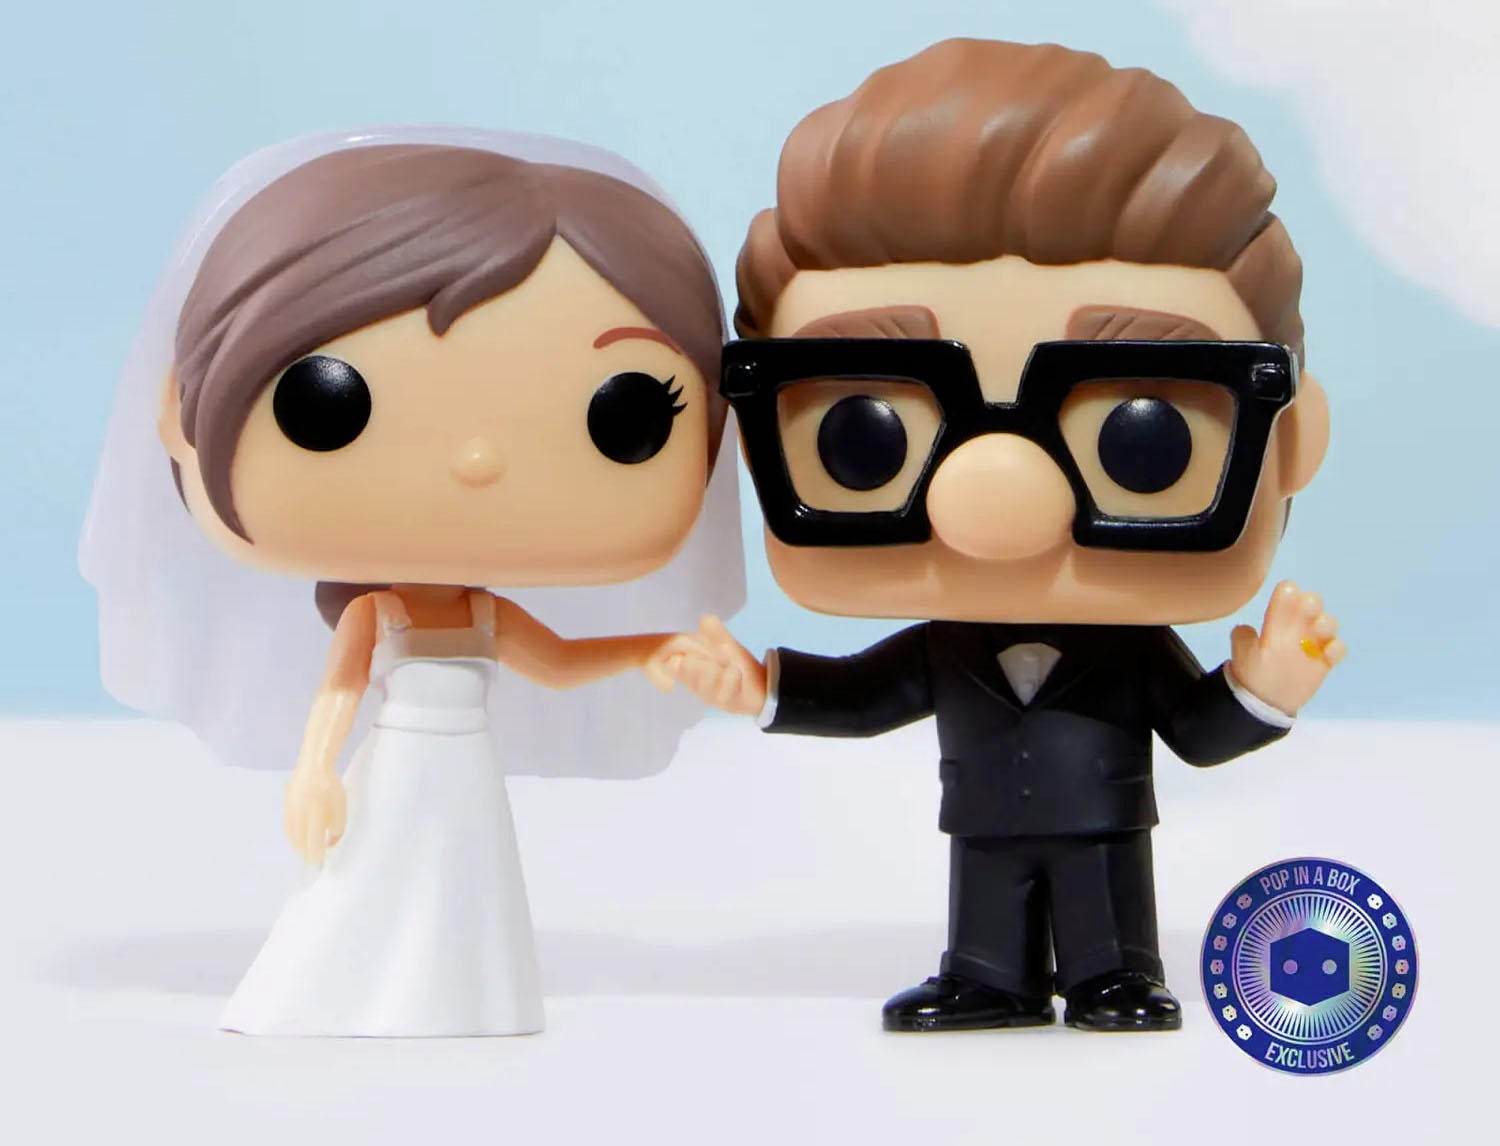 Ellie and Carl From Disney's Up are Together Forever In This Wedding Funko  Pop 2-Pack